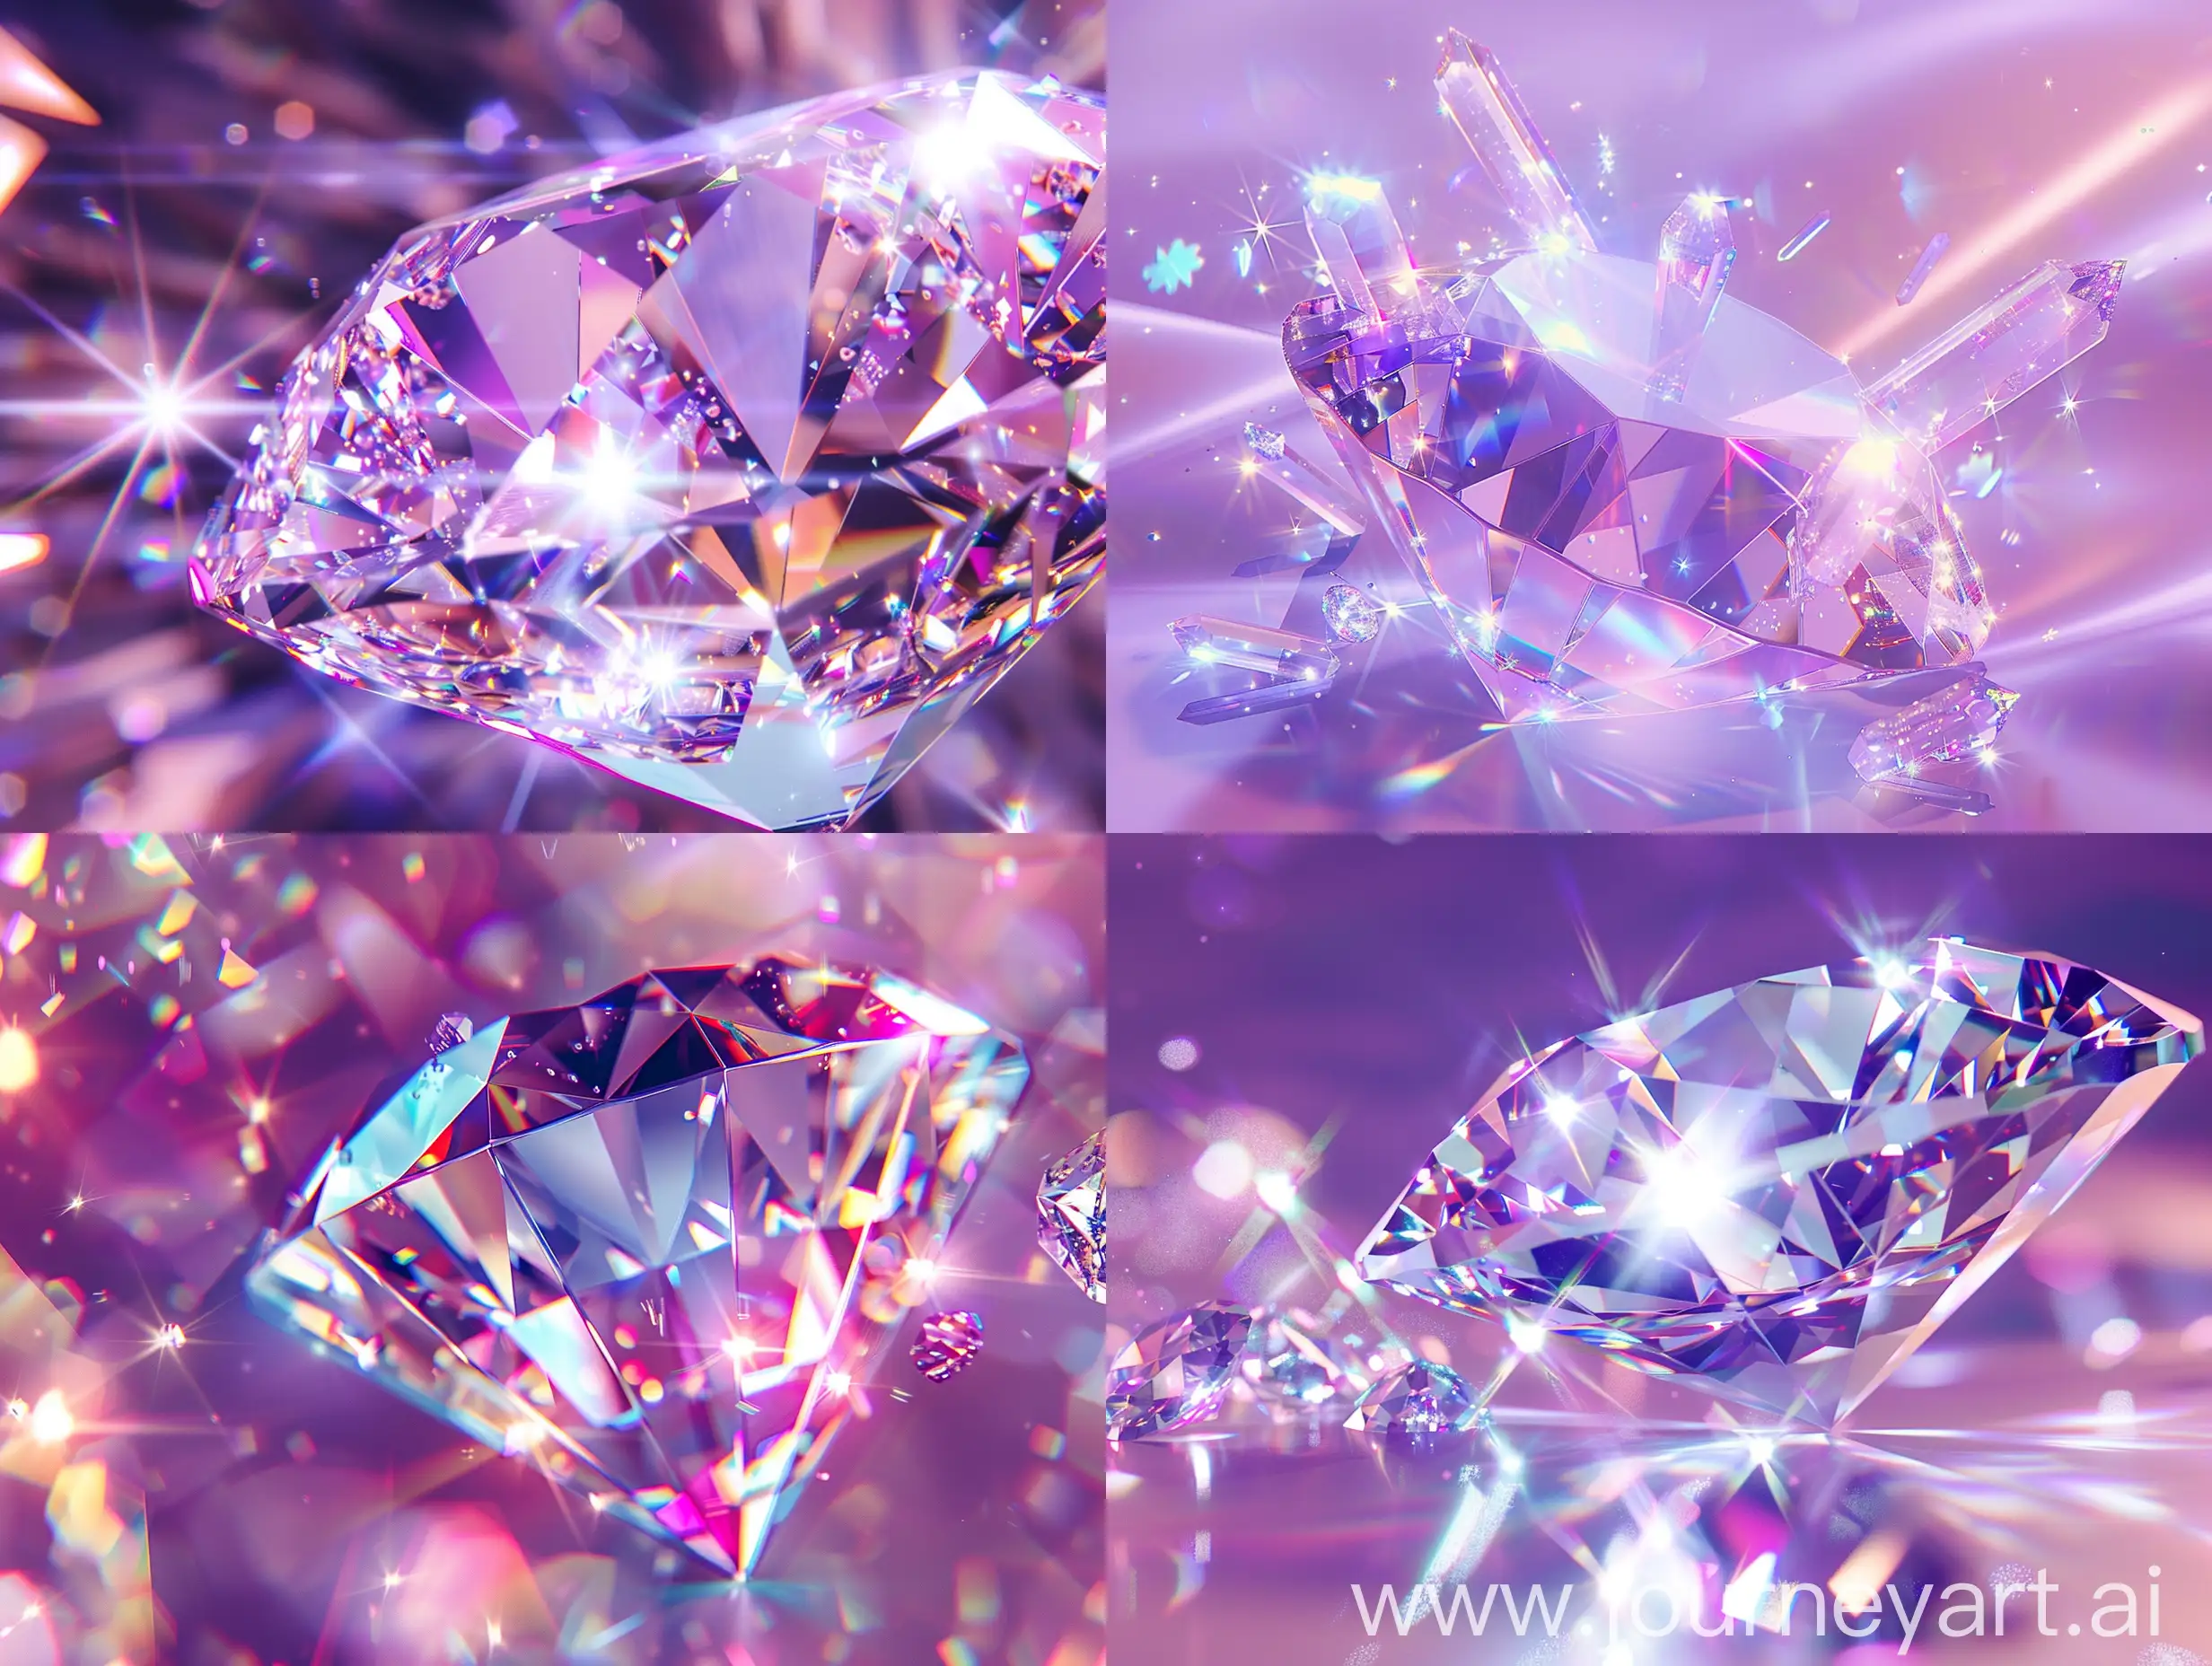 a diamond, refracted sparkles, crystal refraction of light, refractive crystal, diamond prisms, refracted line and sparkles *, refracted lines and sparkles, crystalized time warps, profile picture, swarovski, made of crystalized synapse, crystals enlight the scene, synthwave, purple theme, Dream wave, pastel,
